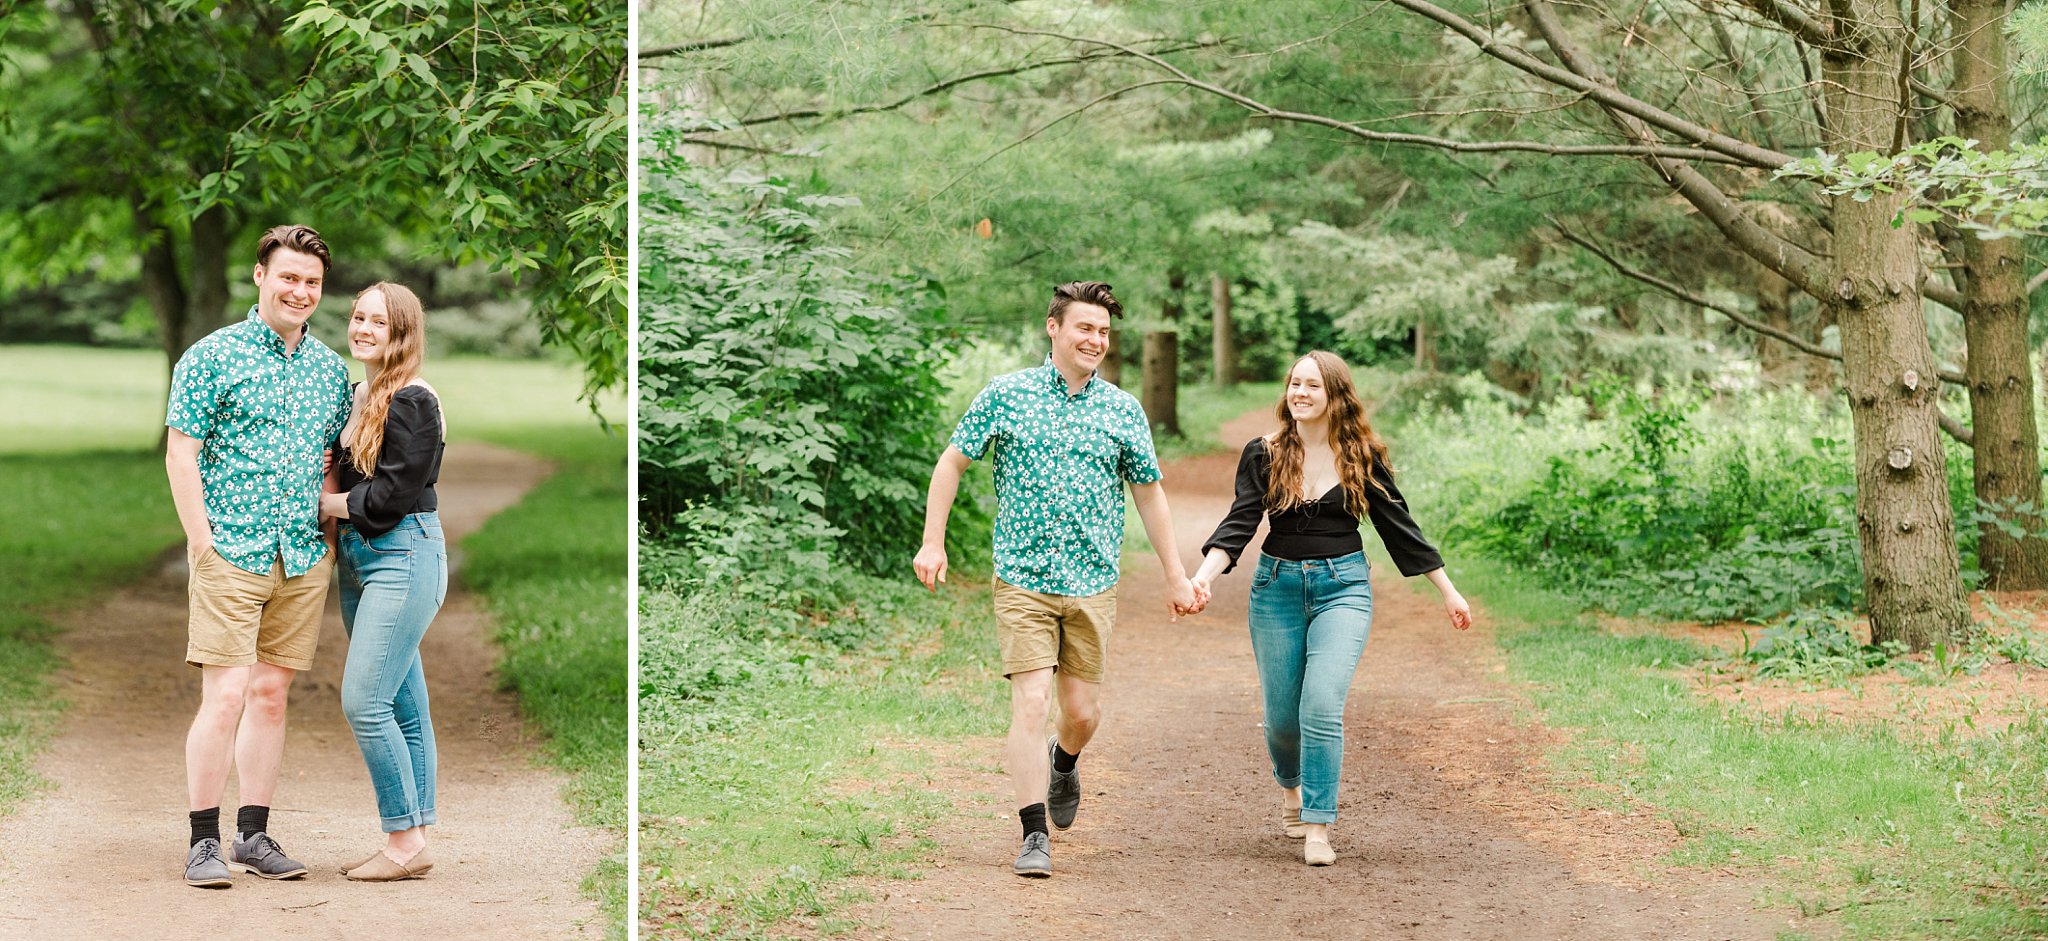 a couple runs together down a path at guelph arboretum during their engagement session